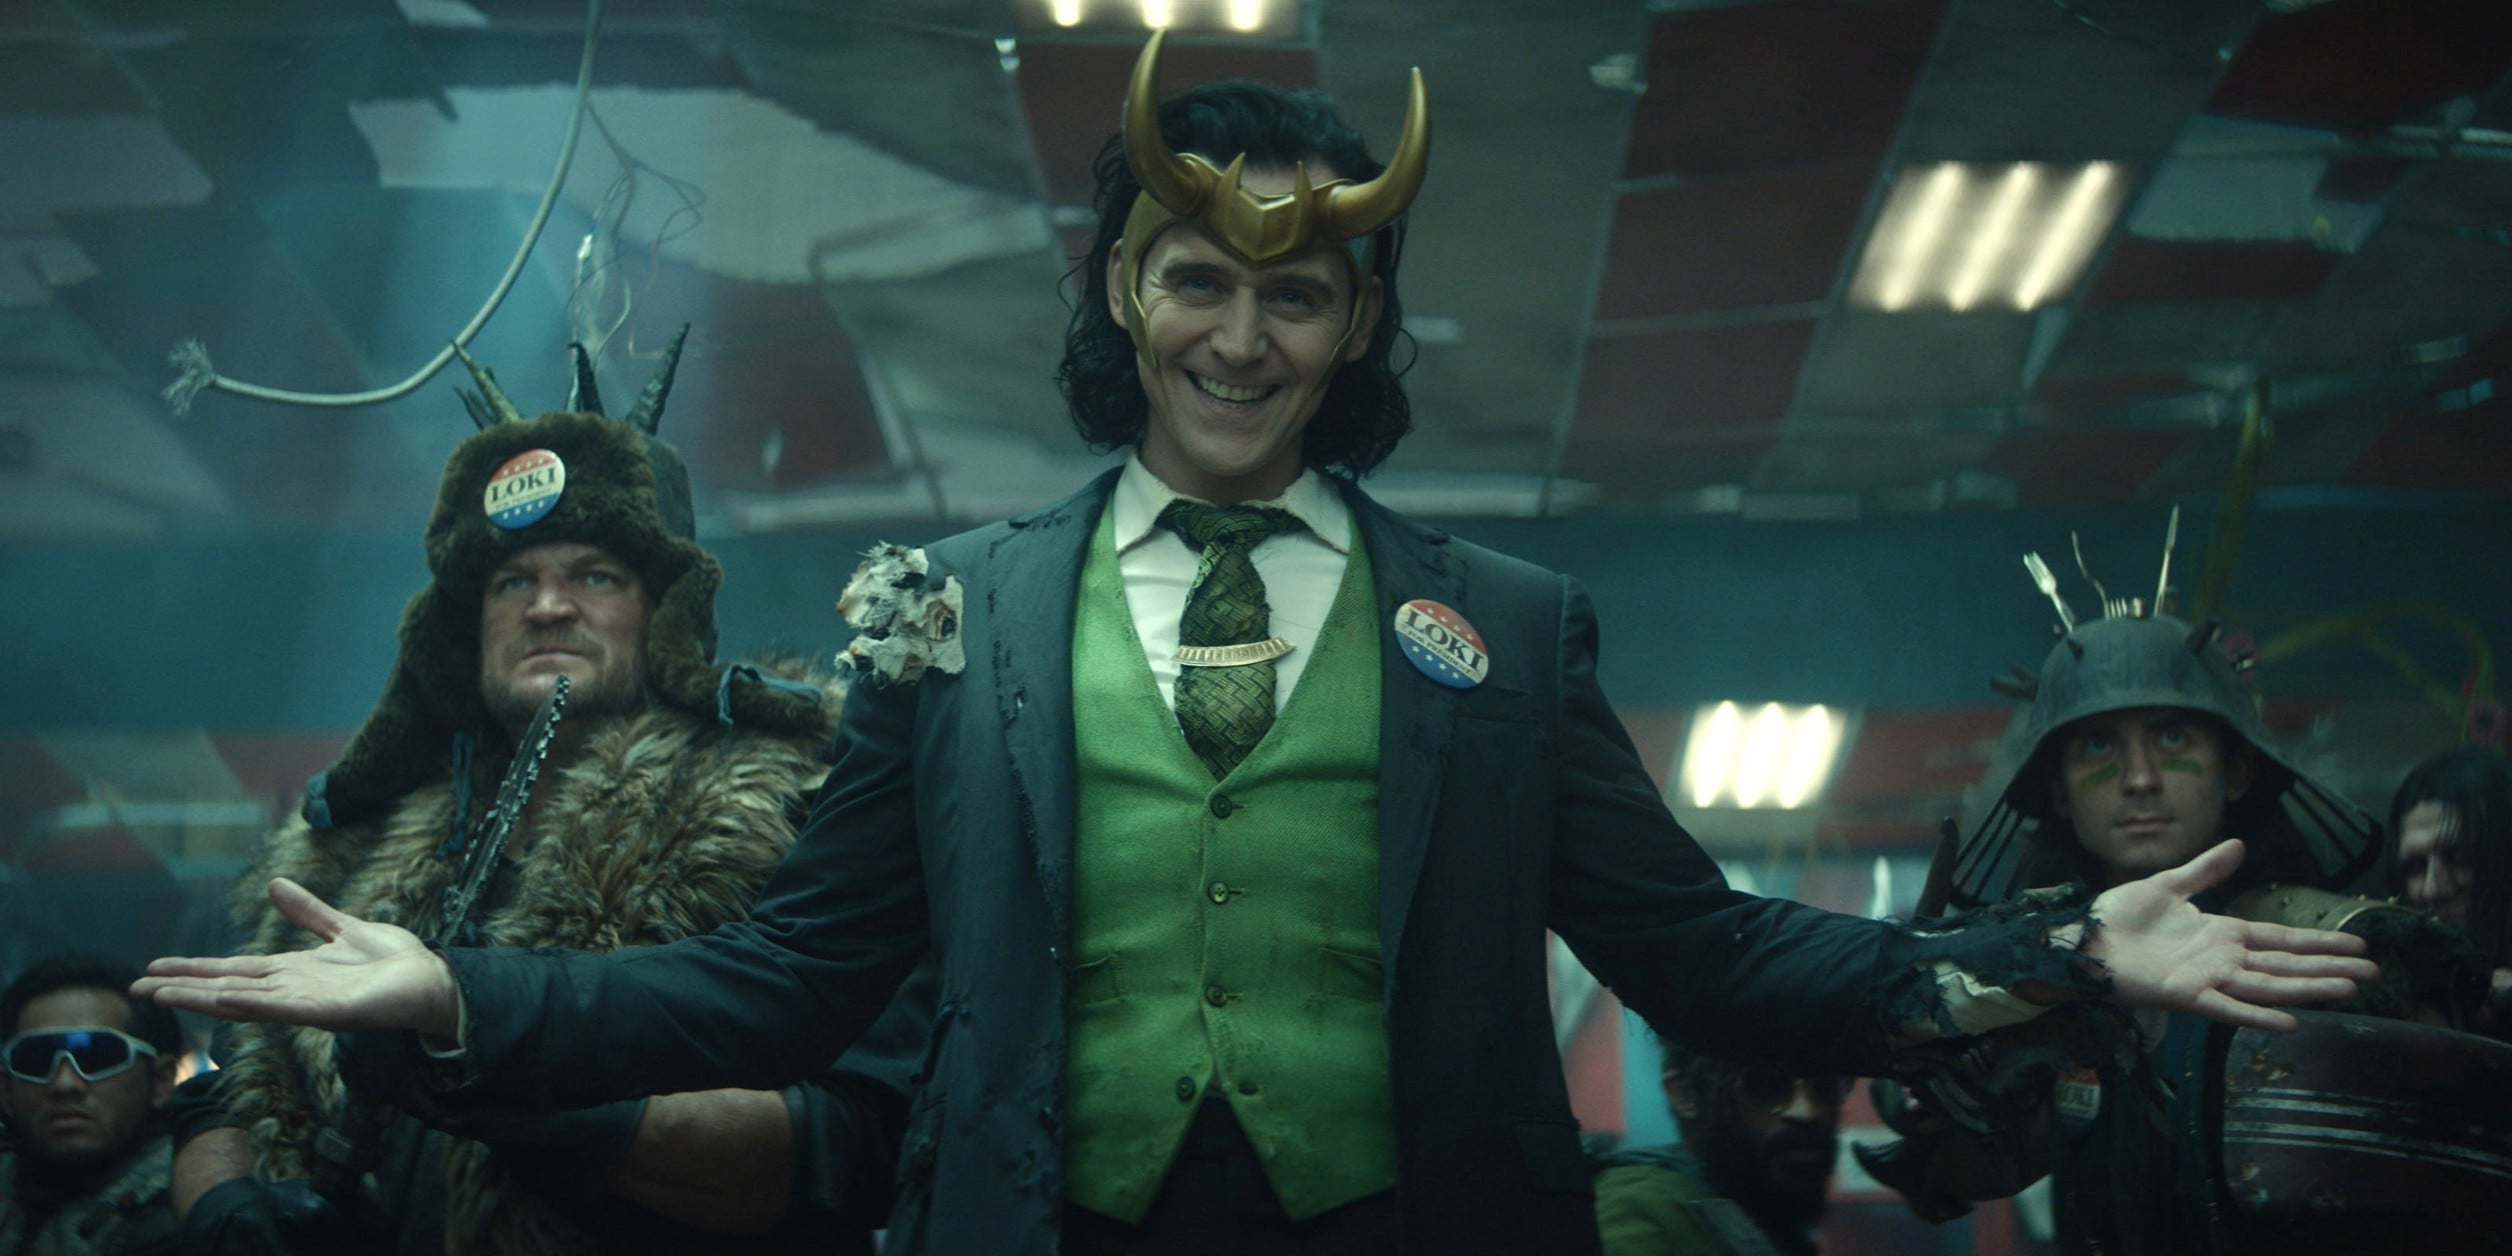 A guide to Loki season 2: release dates, reviews, cast, plot, and